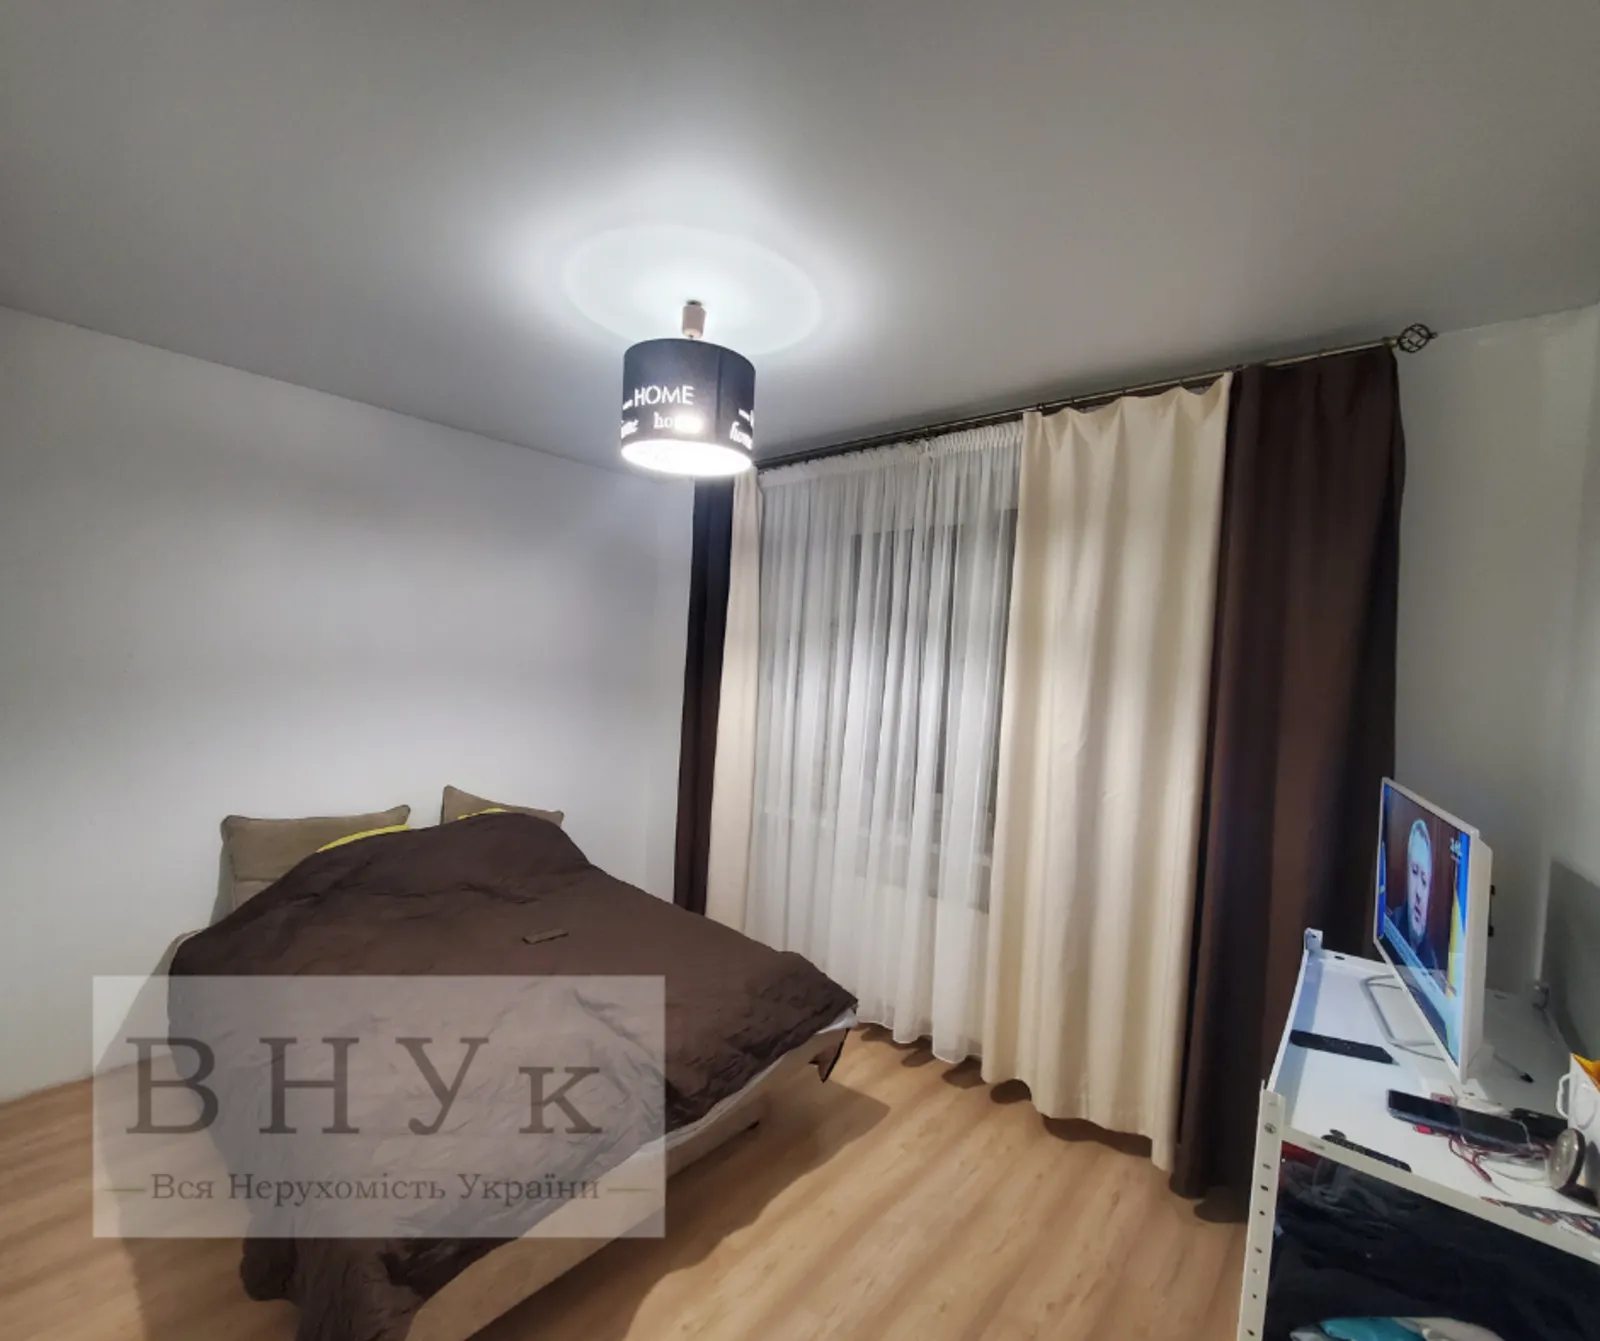 Apartments for sale. 3 rooms, 64 m², 4th floor/4 floors. Mysuliv , Ternopil. 